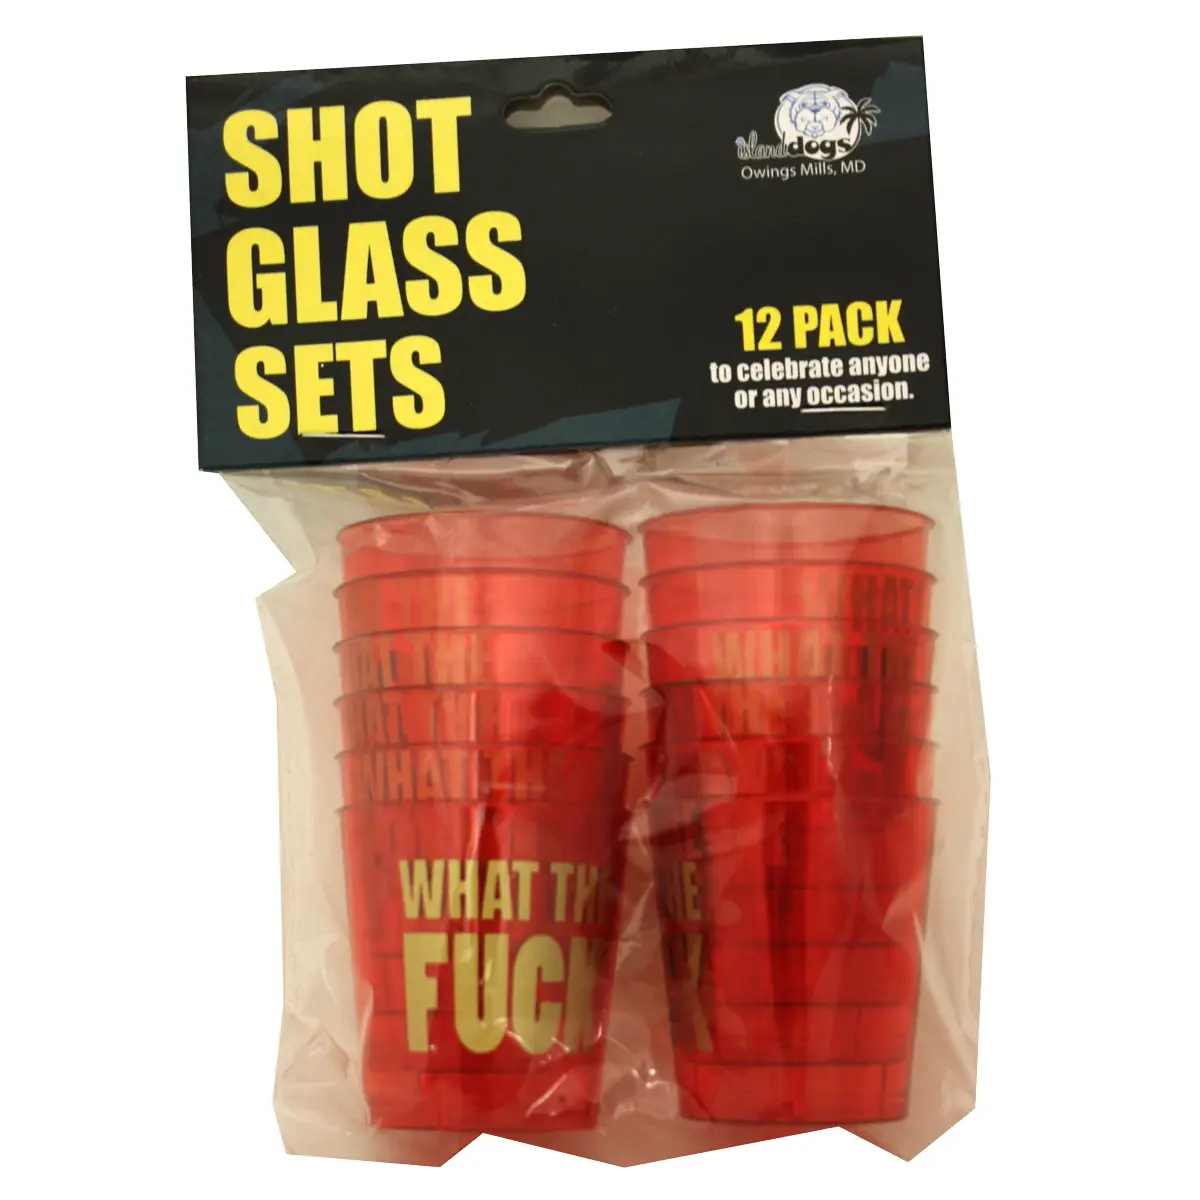 Indulge in some fun with Island Dogs' What The Fuck Shot Glass Set. This set, designed with a cheeky phrase, is a lively addition to your home barware. Perfect for parties or casual get-togethers, these shot glasses capture the playful spirit of Island Dogs, a family business with over 25 years of experience in creating unique gifts and novelties. Make your kitchen and tabletop more exciting with this set.